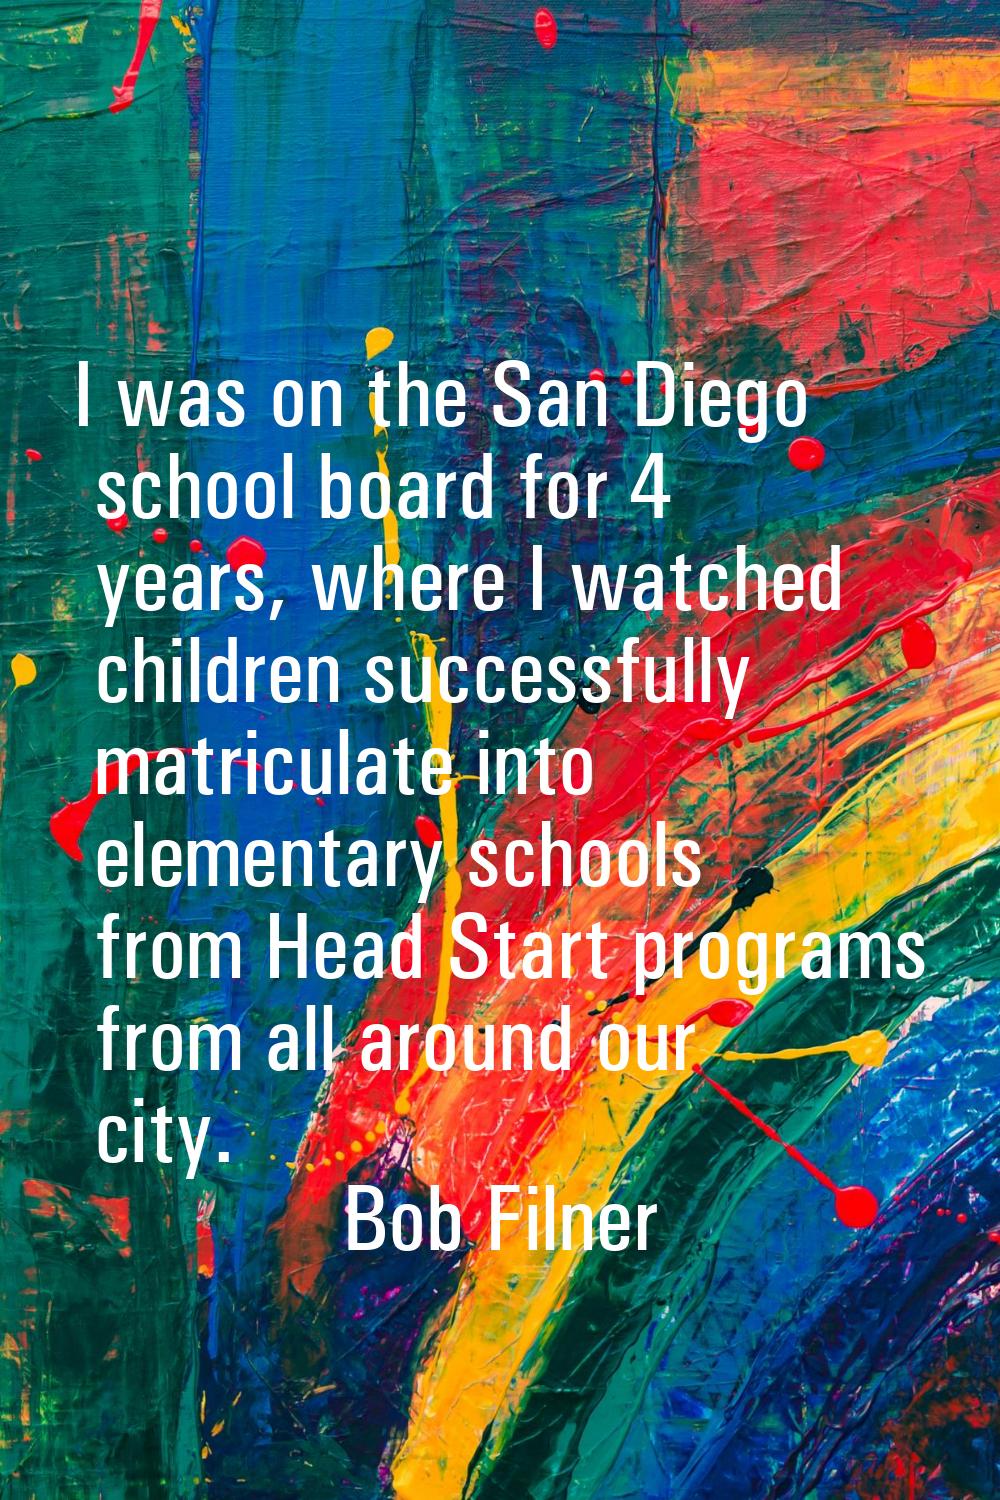 I was on the San Diego school board for 4 years, where I watched children successfully matriculate 